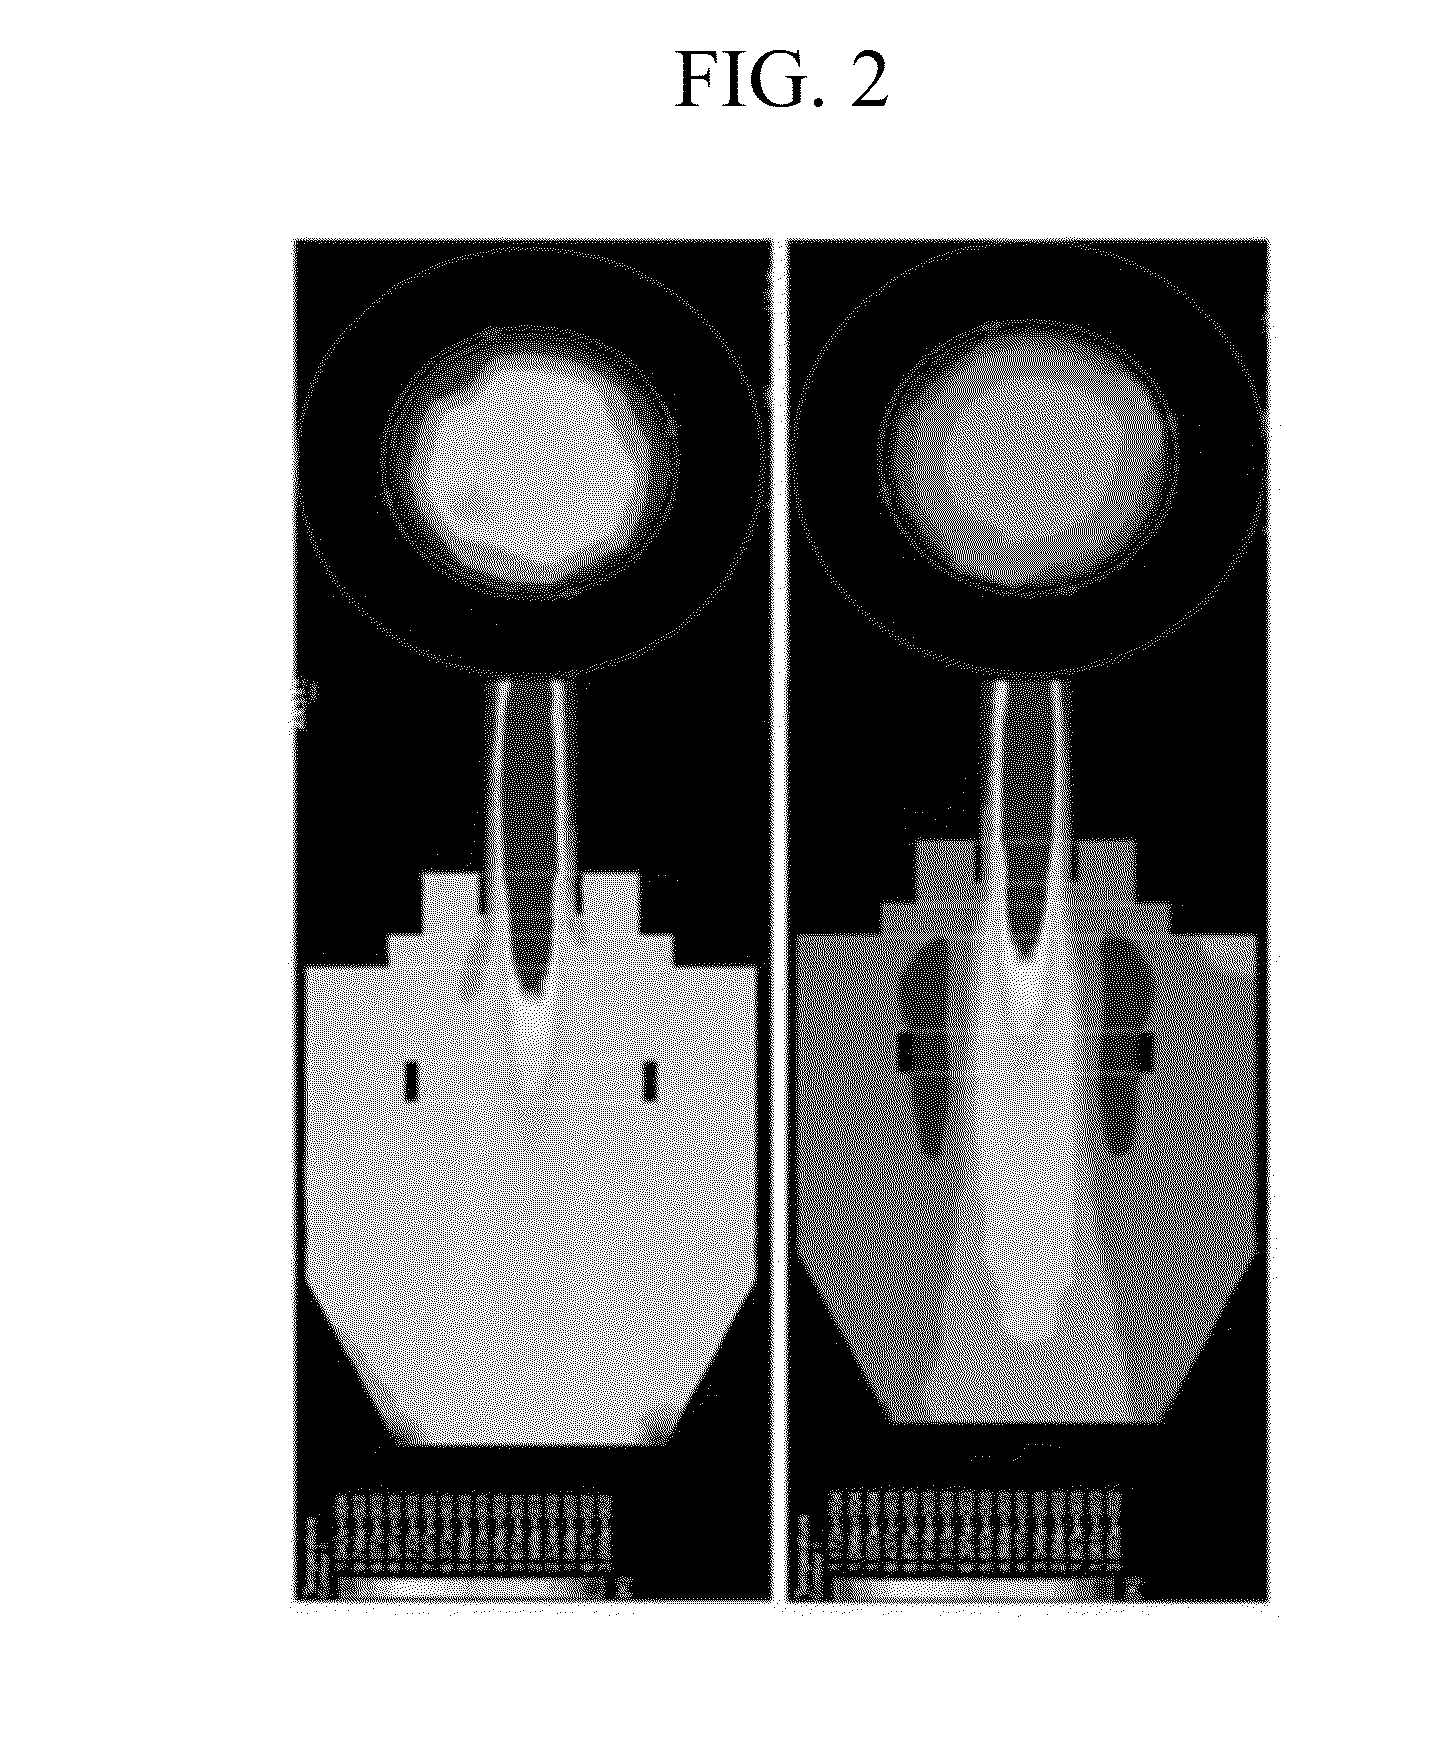 APPARATUS FOR MANUFACTURING Si-BASED NANO-PARTICLES USING PLASMA